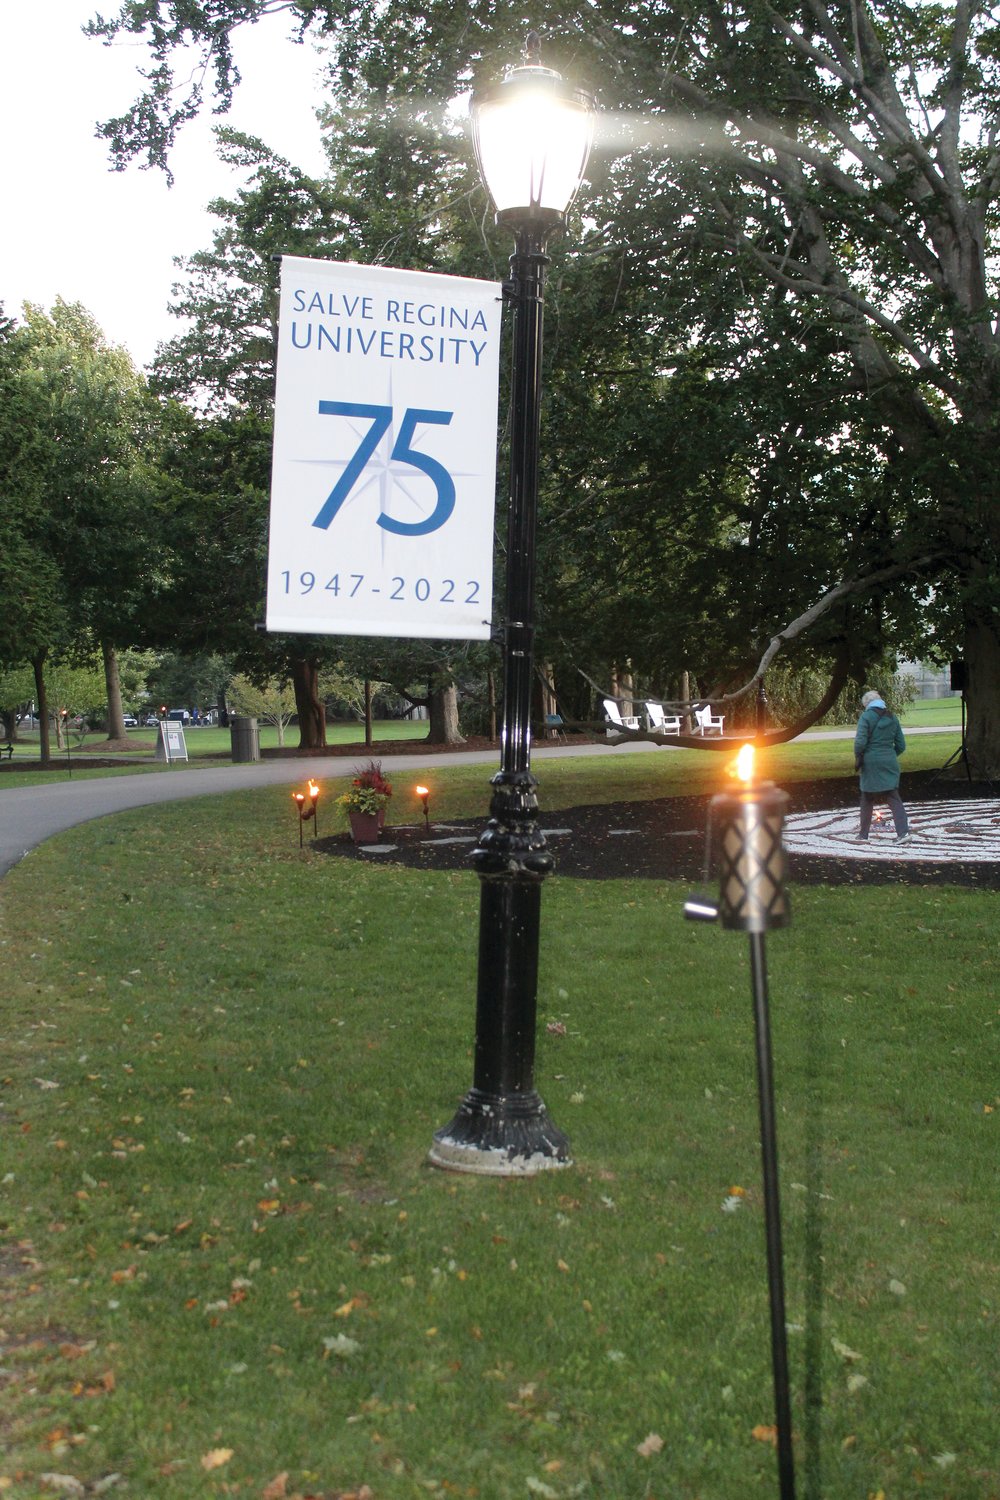 Inspired by Providence’s WaterFire, Salve Regina hosted an illuminated walk highlighting the university’s mercy heritage and history, beginning at the gates of Gerety Hall.